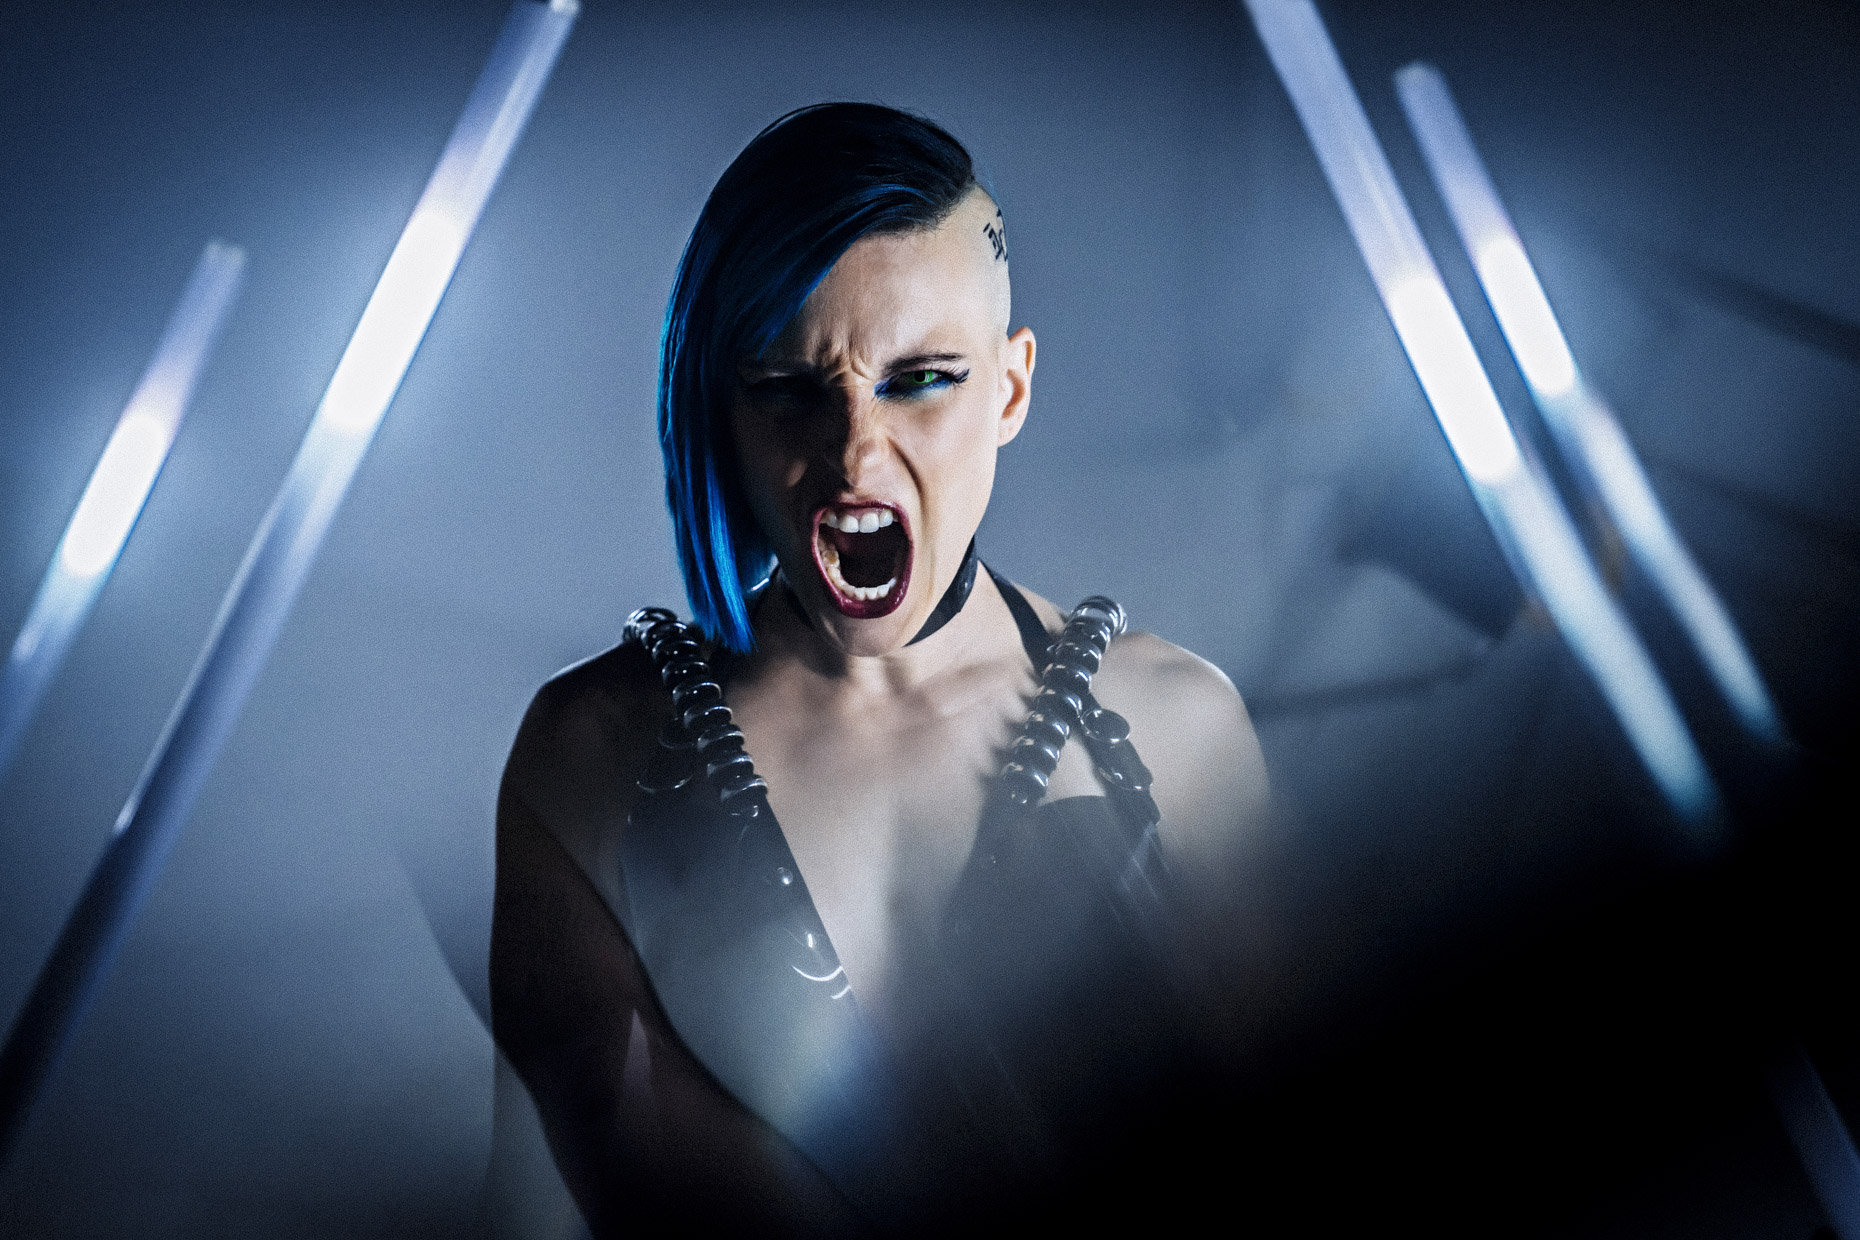 Cyber punk musician Le Destroy with blue hair screaming toward camera